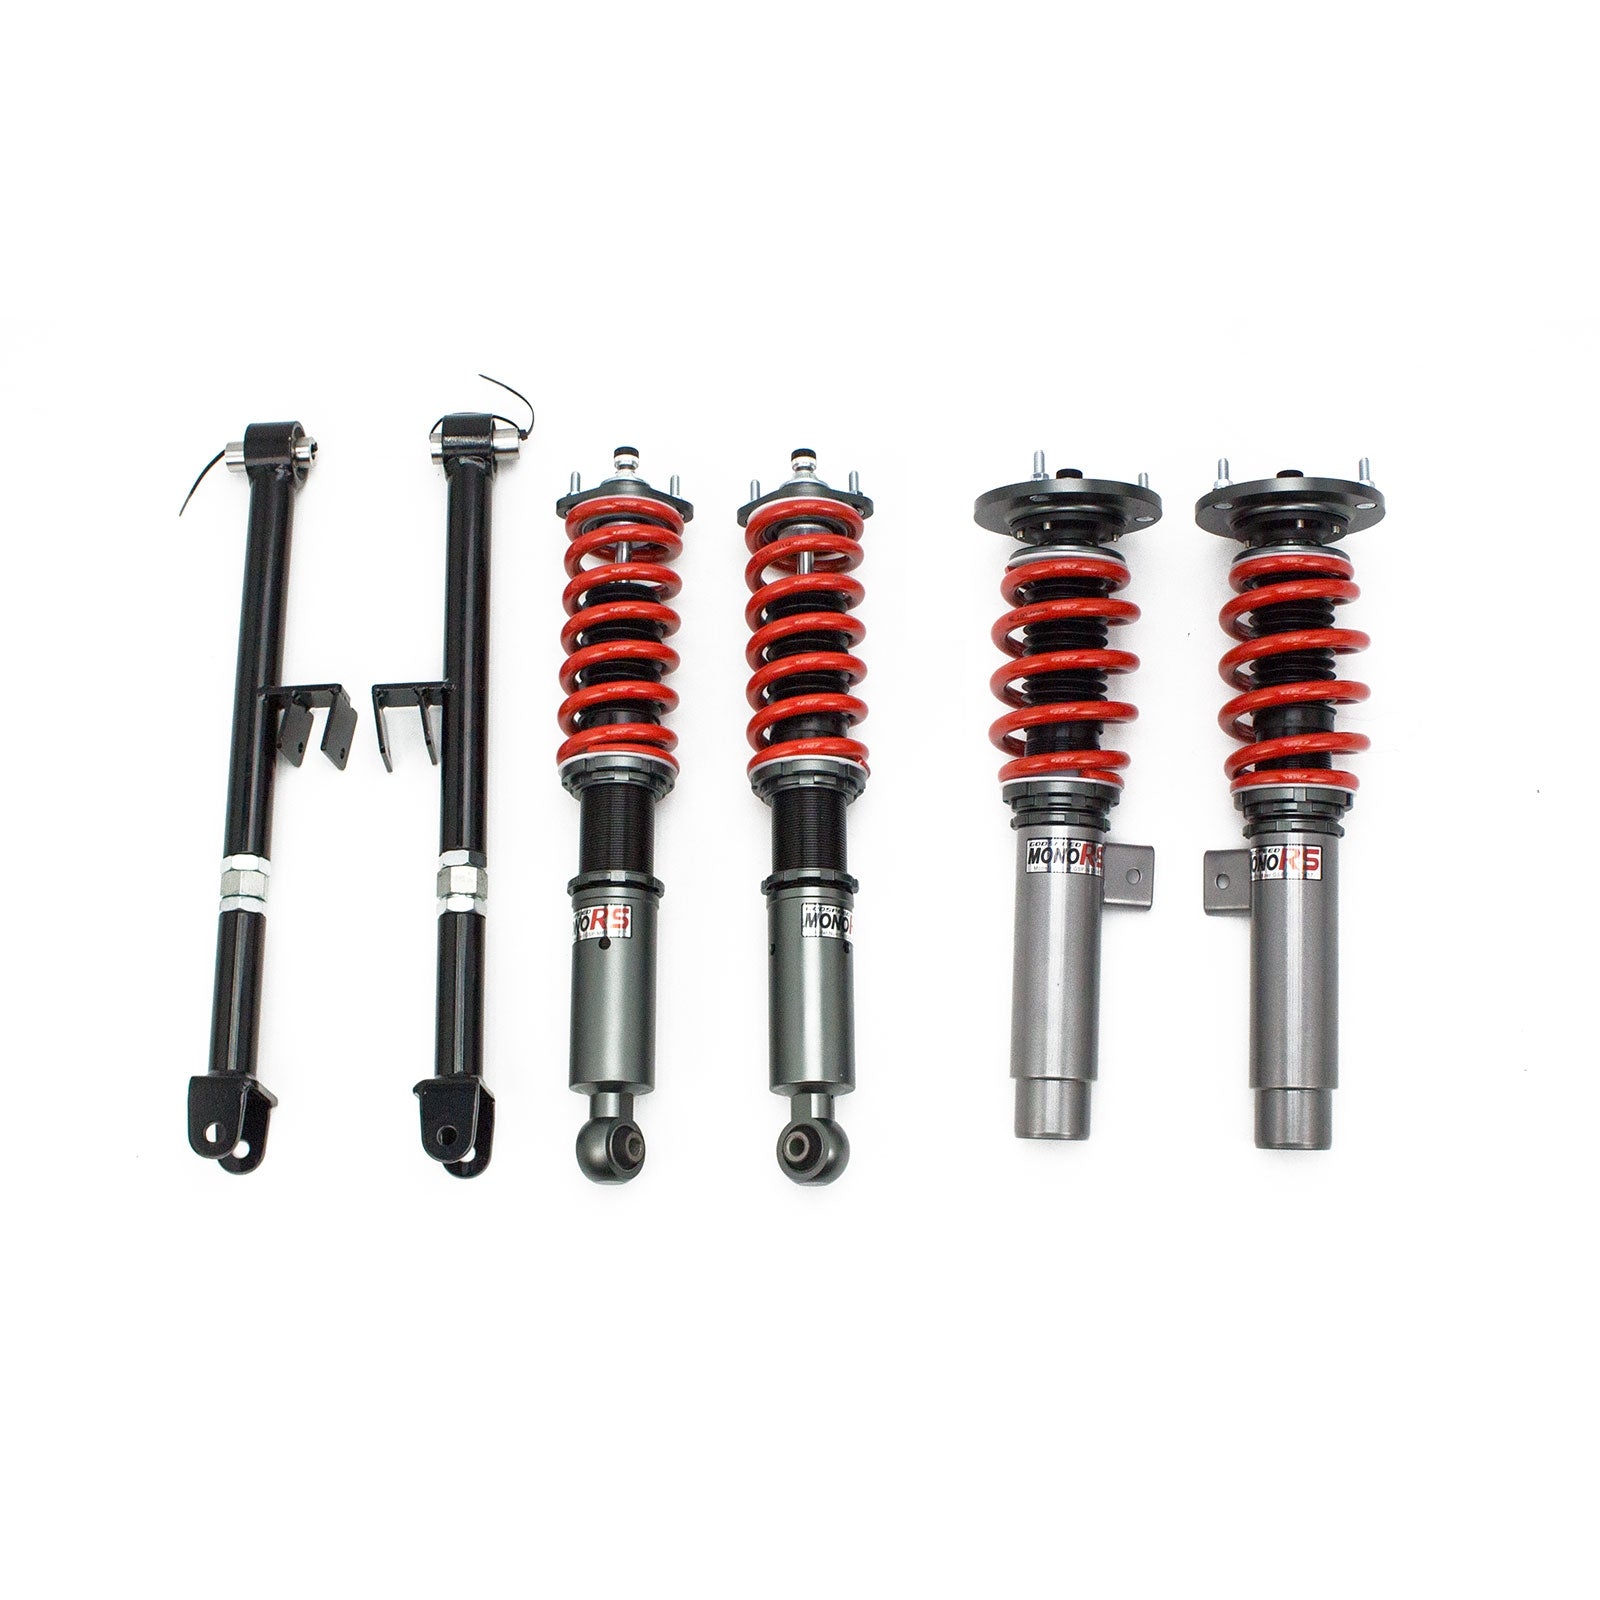 Godspeed MRS1417 MonoRS Coilovers Lowering Kit, True Coilover Conversion, 32 Damping Adjustments, Ride Height Ajustable